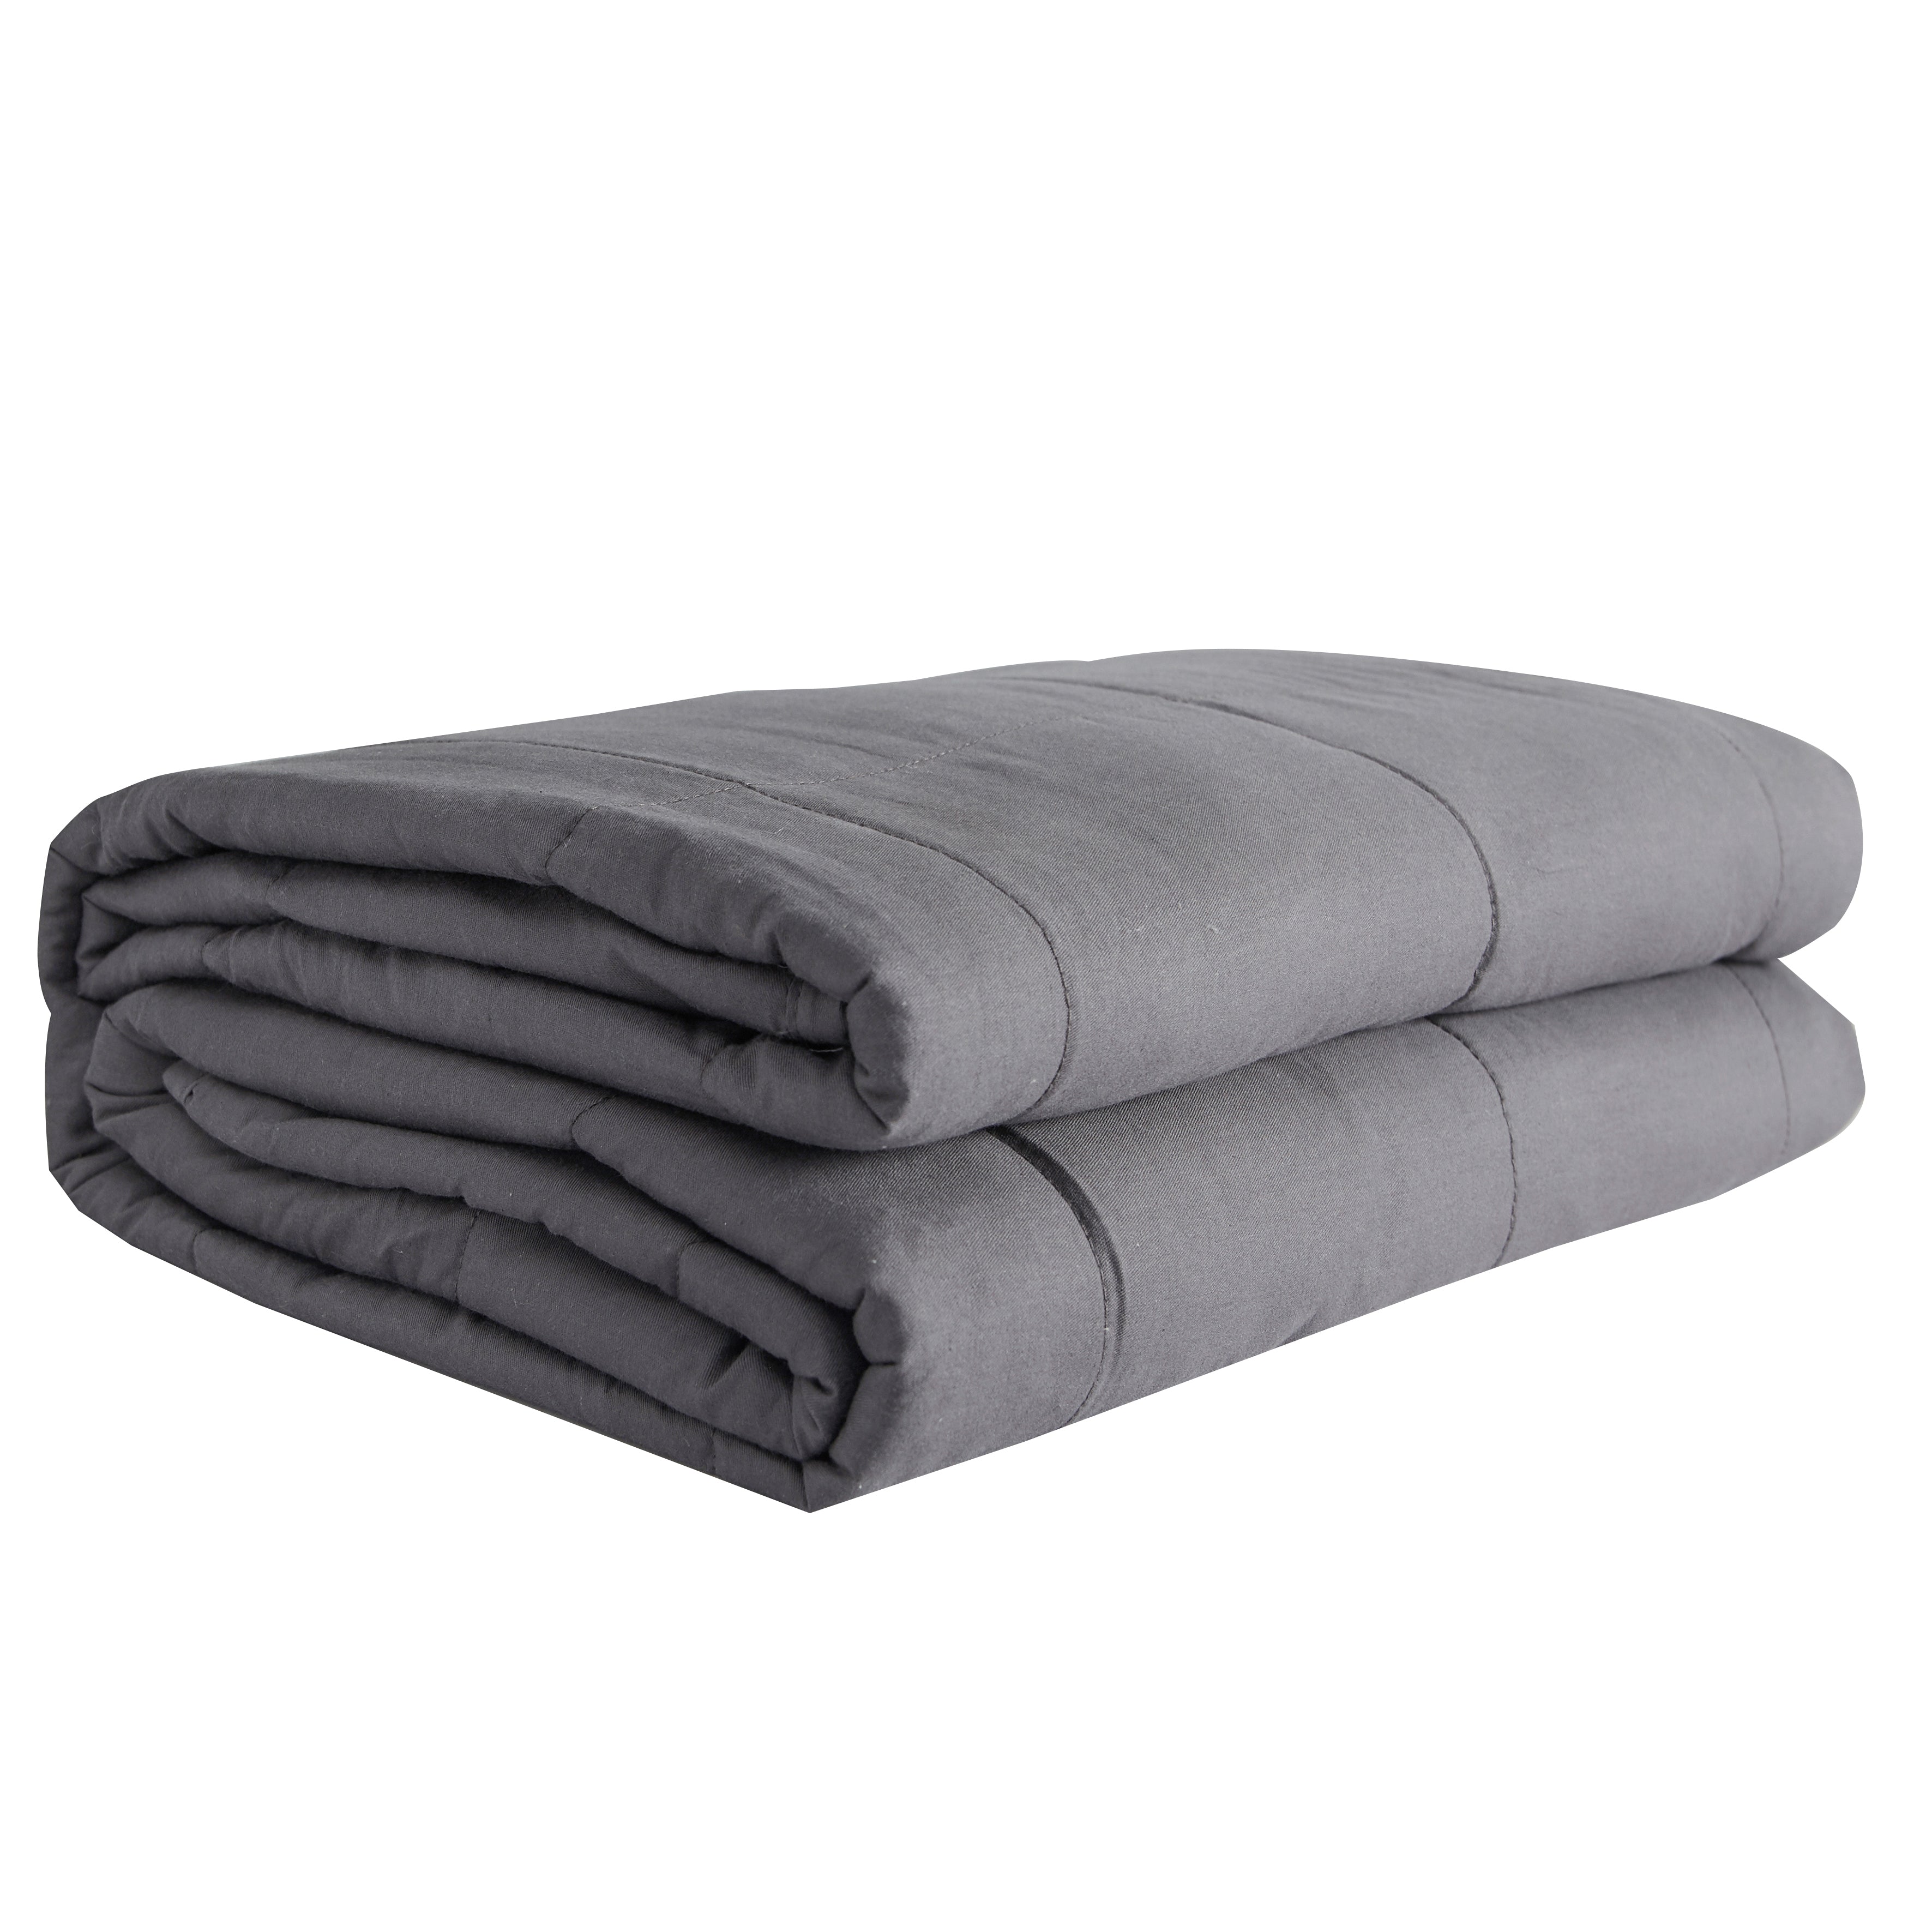 100% Cotton Weighted Blanket - 15 & 20 lb